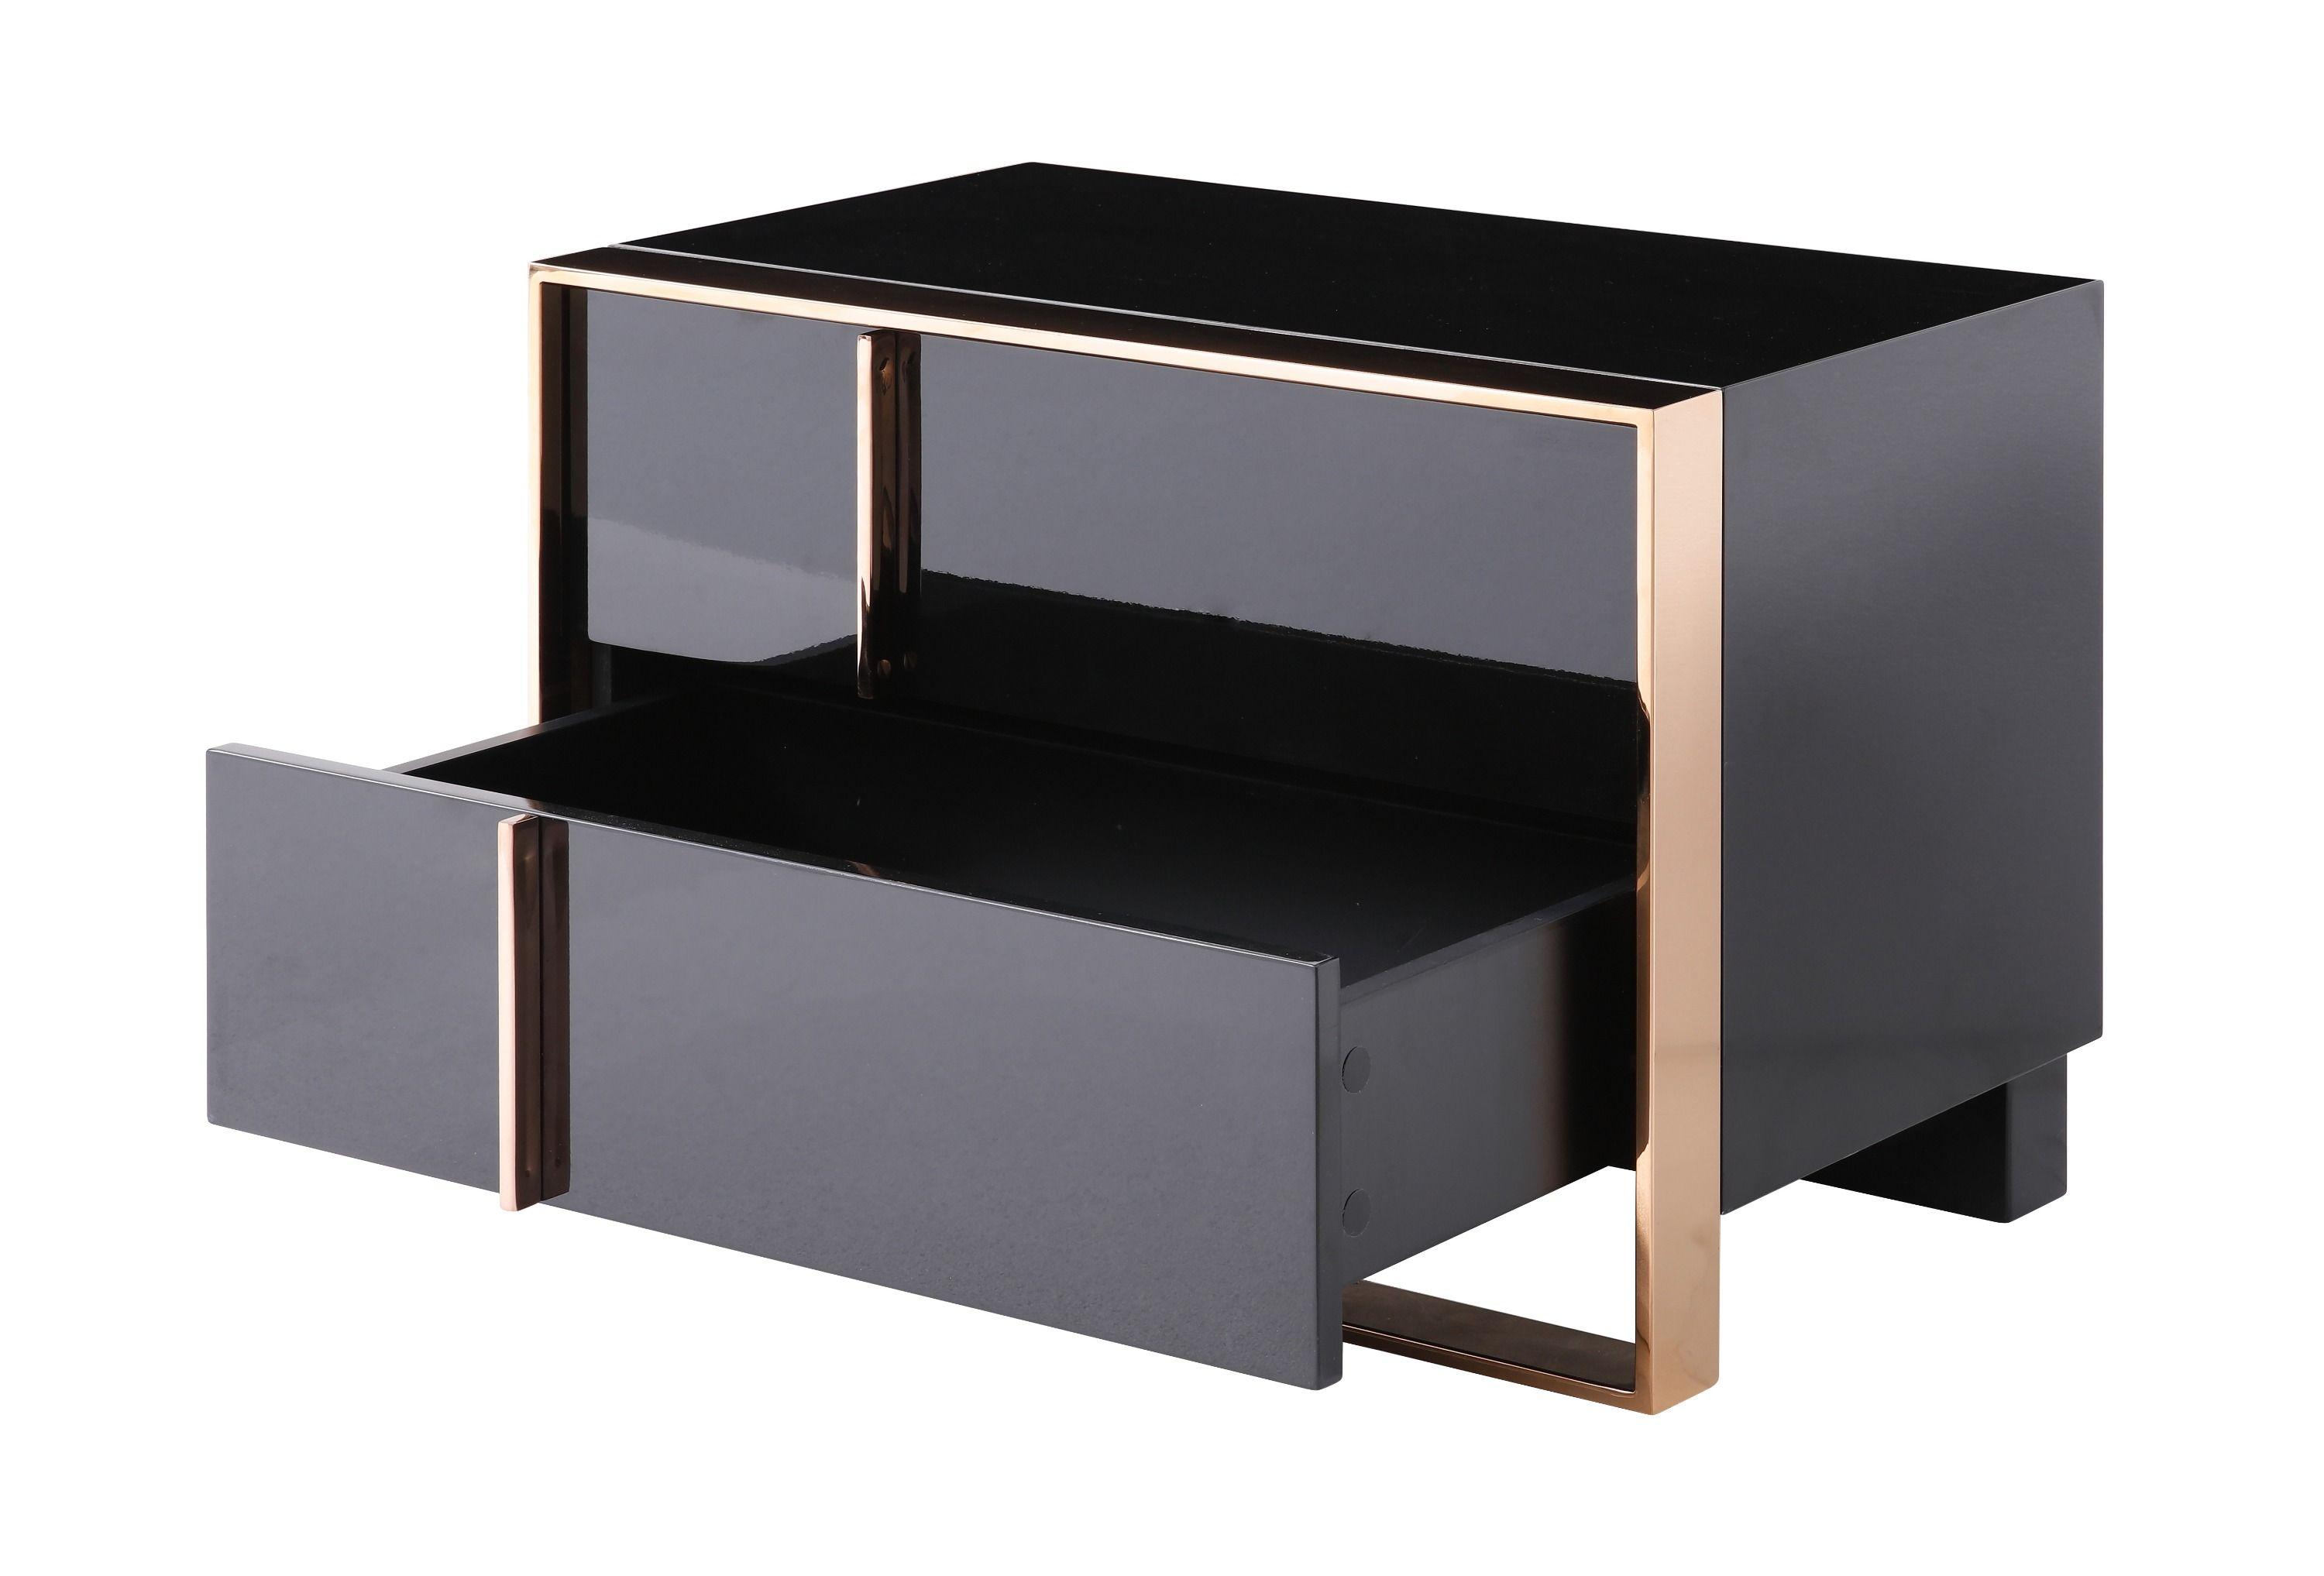 

    
Contemporary Black/Rosegold Stainless Steel Nightstand VIG Furniture Nova Domus VGVC-A002-N
